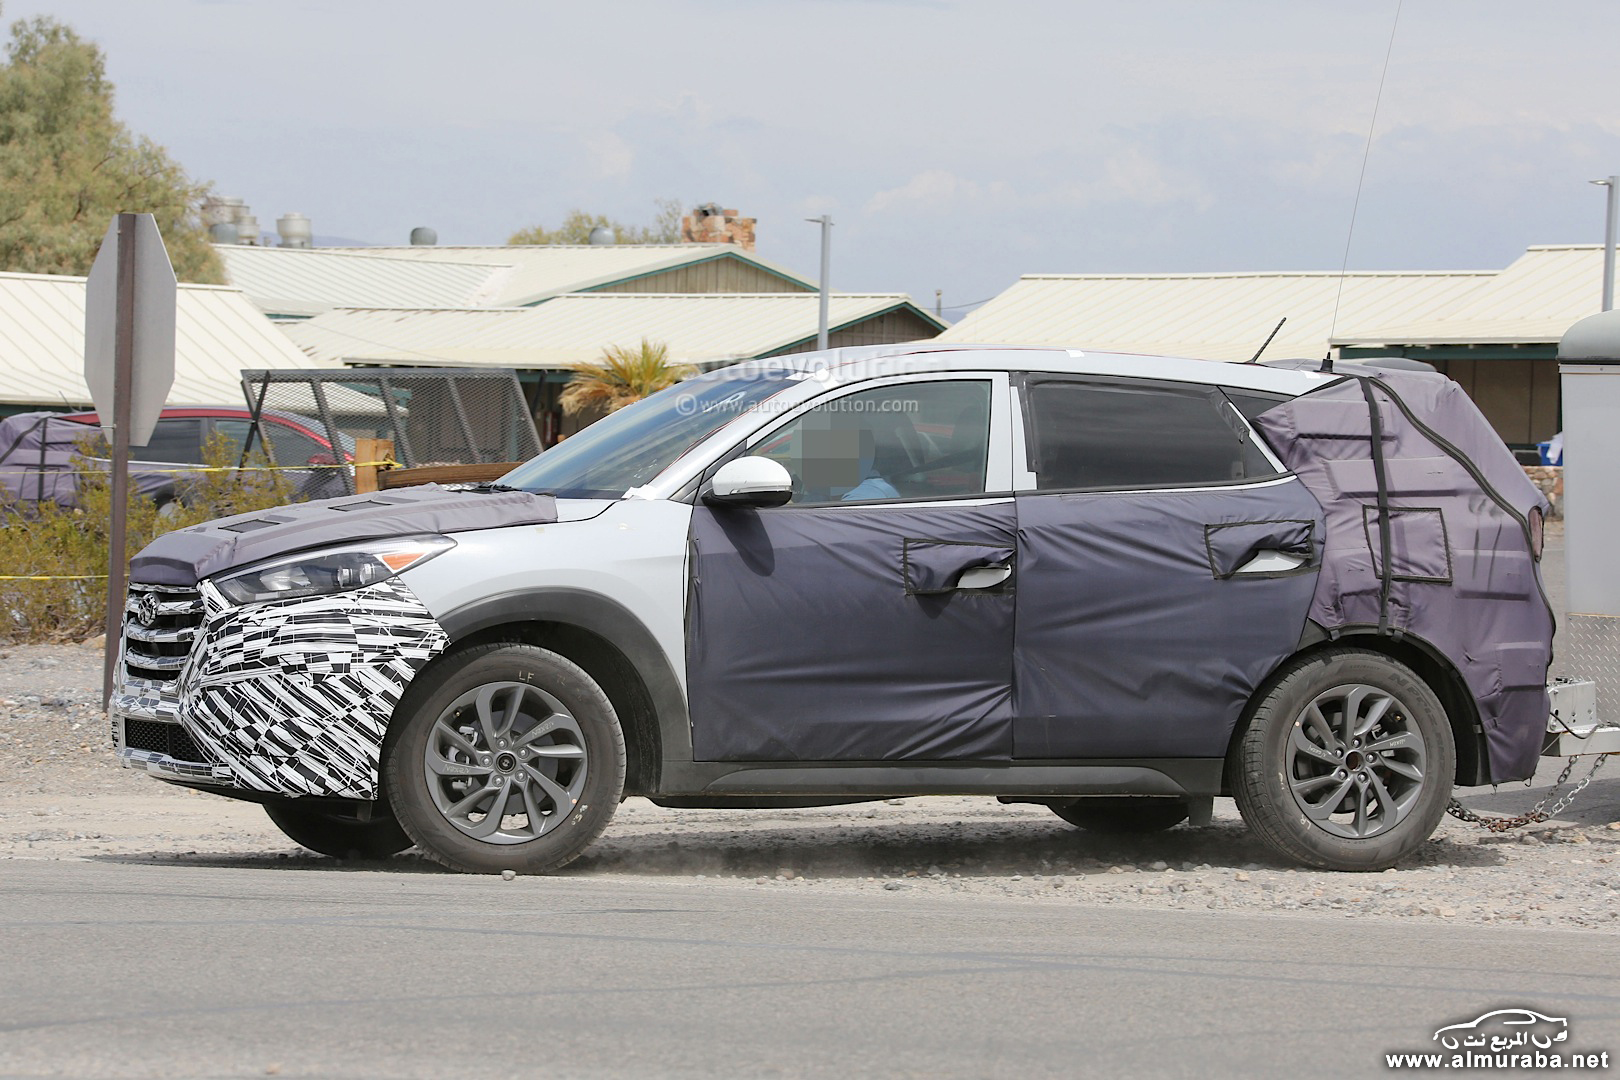 all-new-2016-hyundai-tucson-spied-with-less-camouflage-in-america-photo-gallery_7